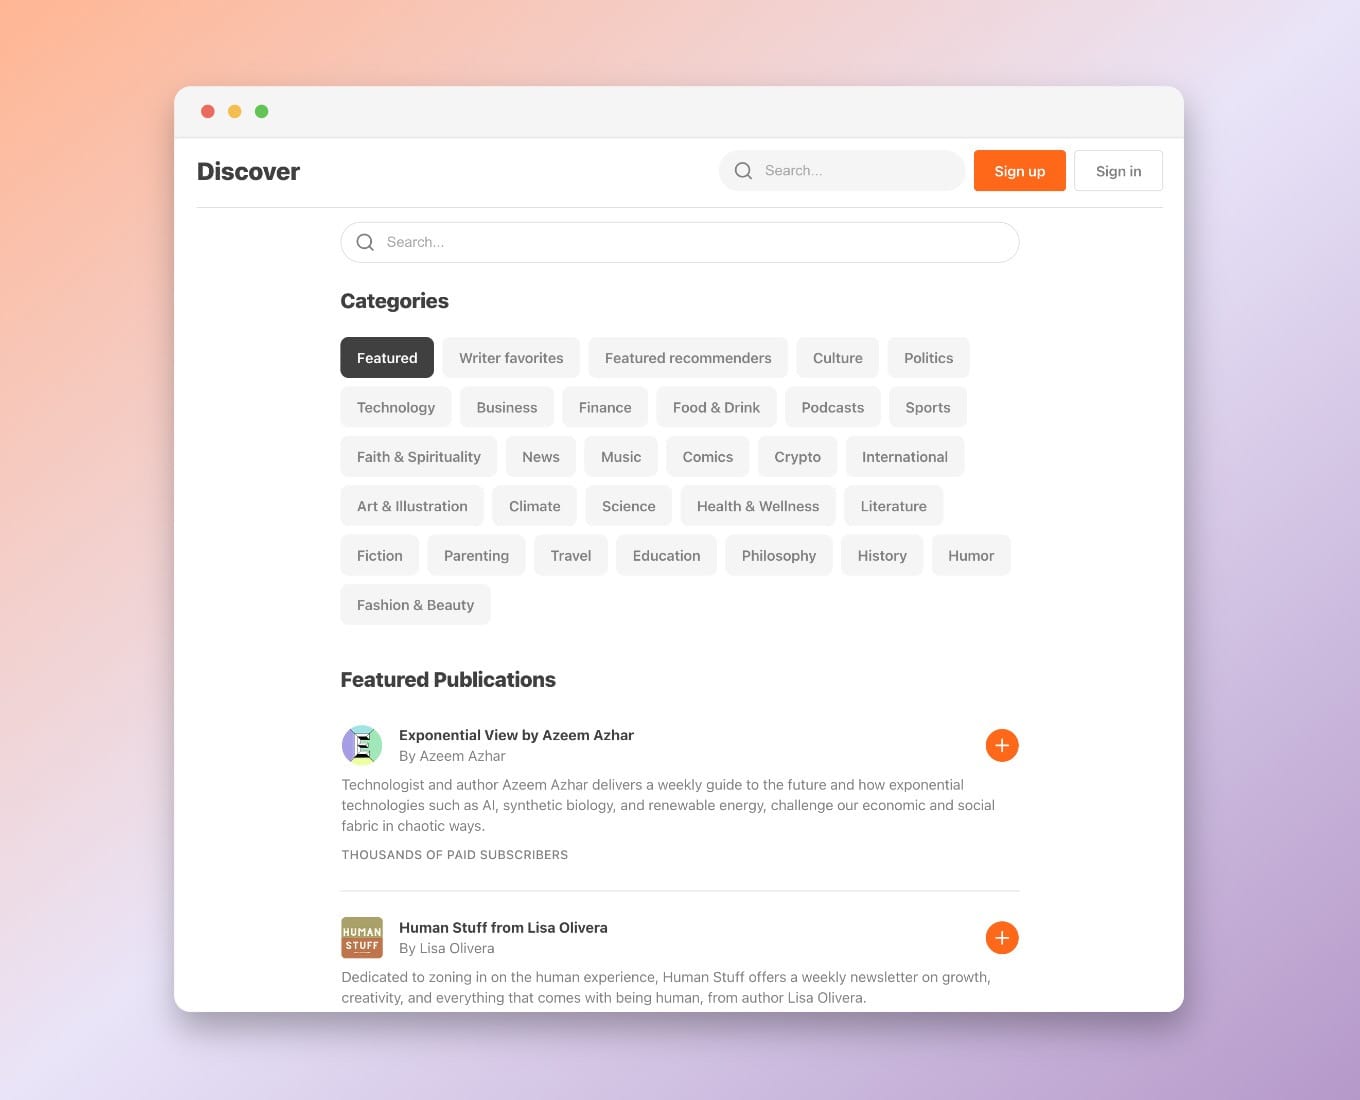 Substack's 'Discover' feature allows you to explore the best newsletters and publications across a variety of categories